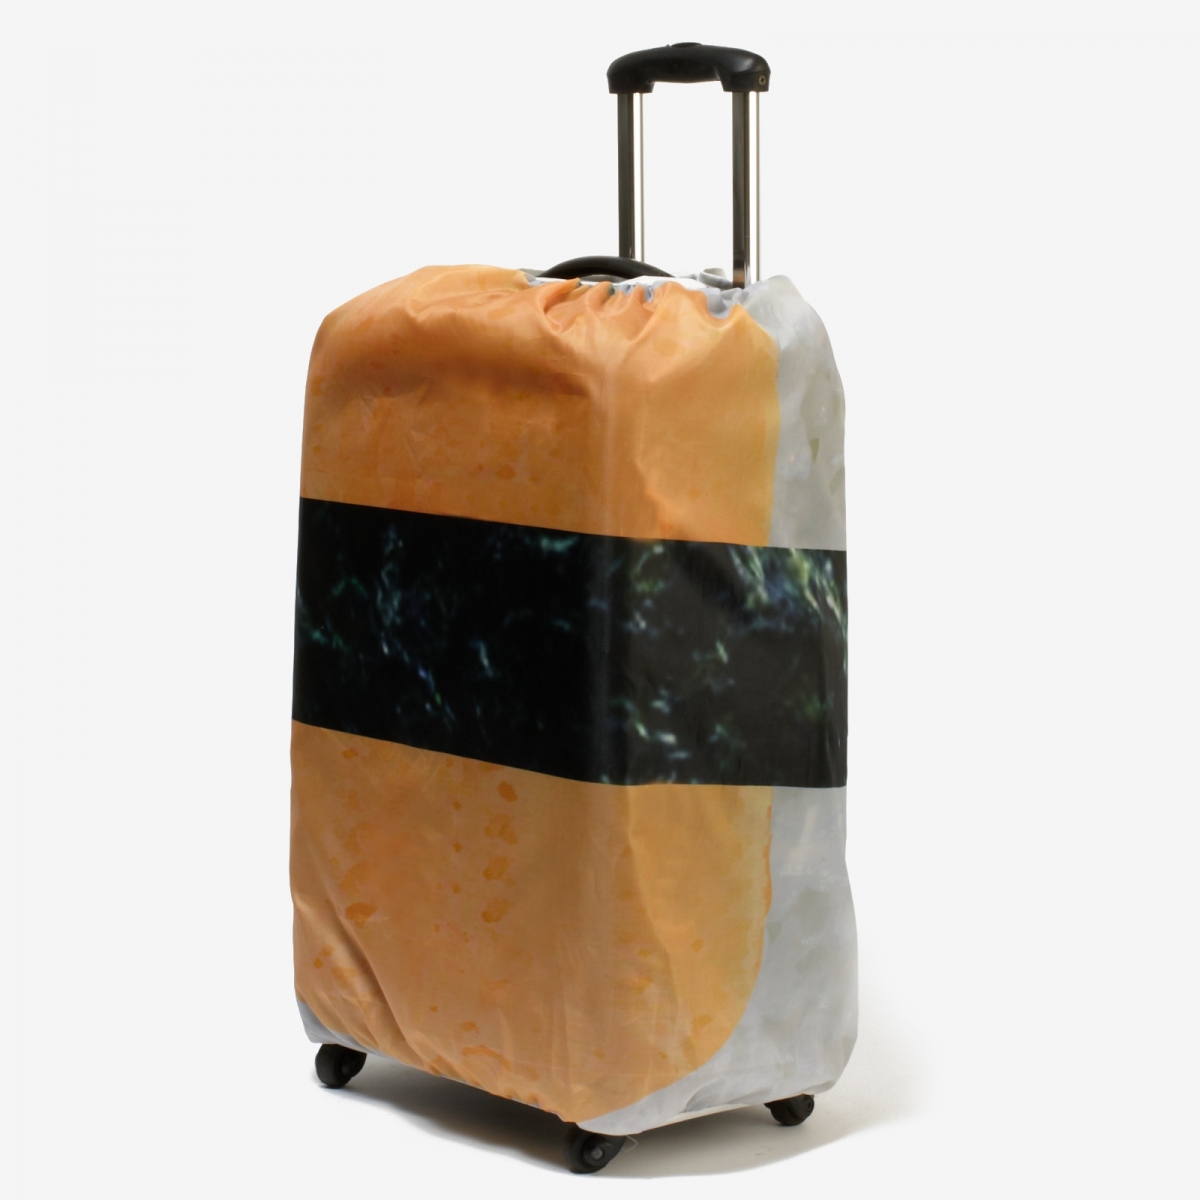 Turn any Airport Baggage Claim Carousel into a Kaiten Sushi with These Sushi-Themed Suitcase Covers!